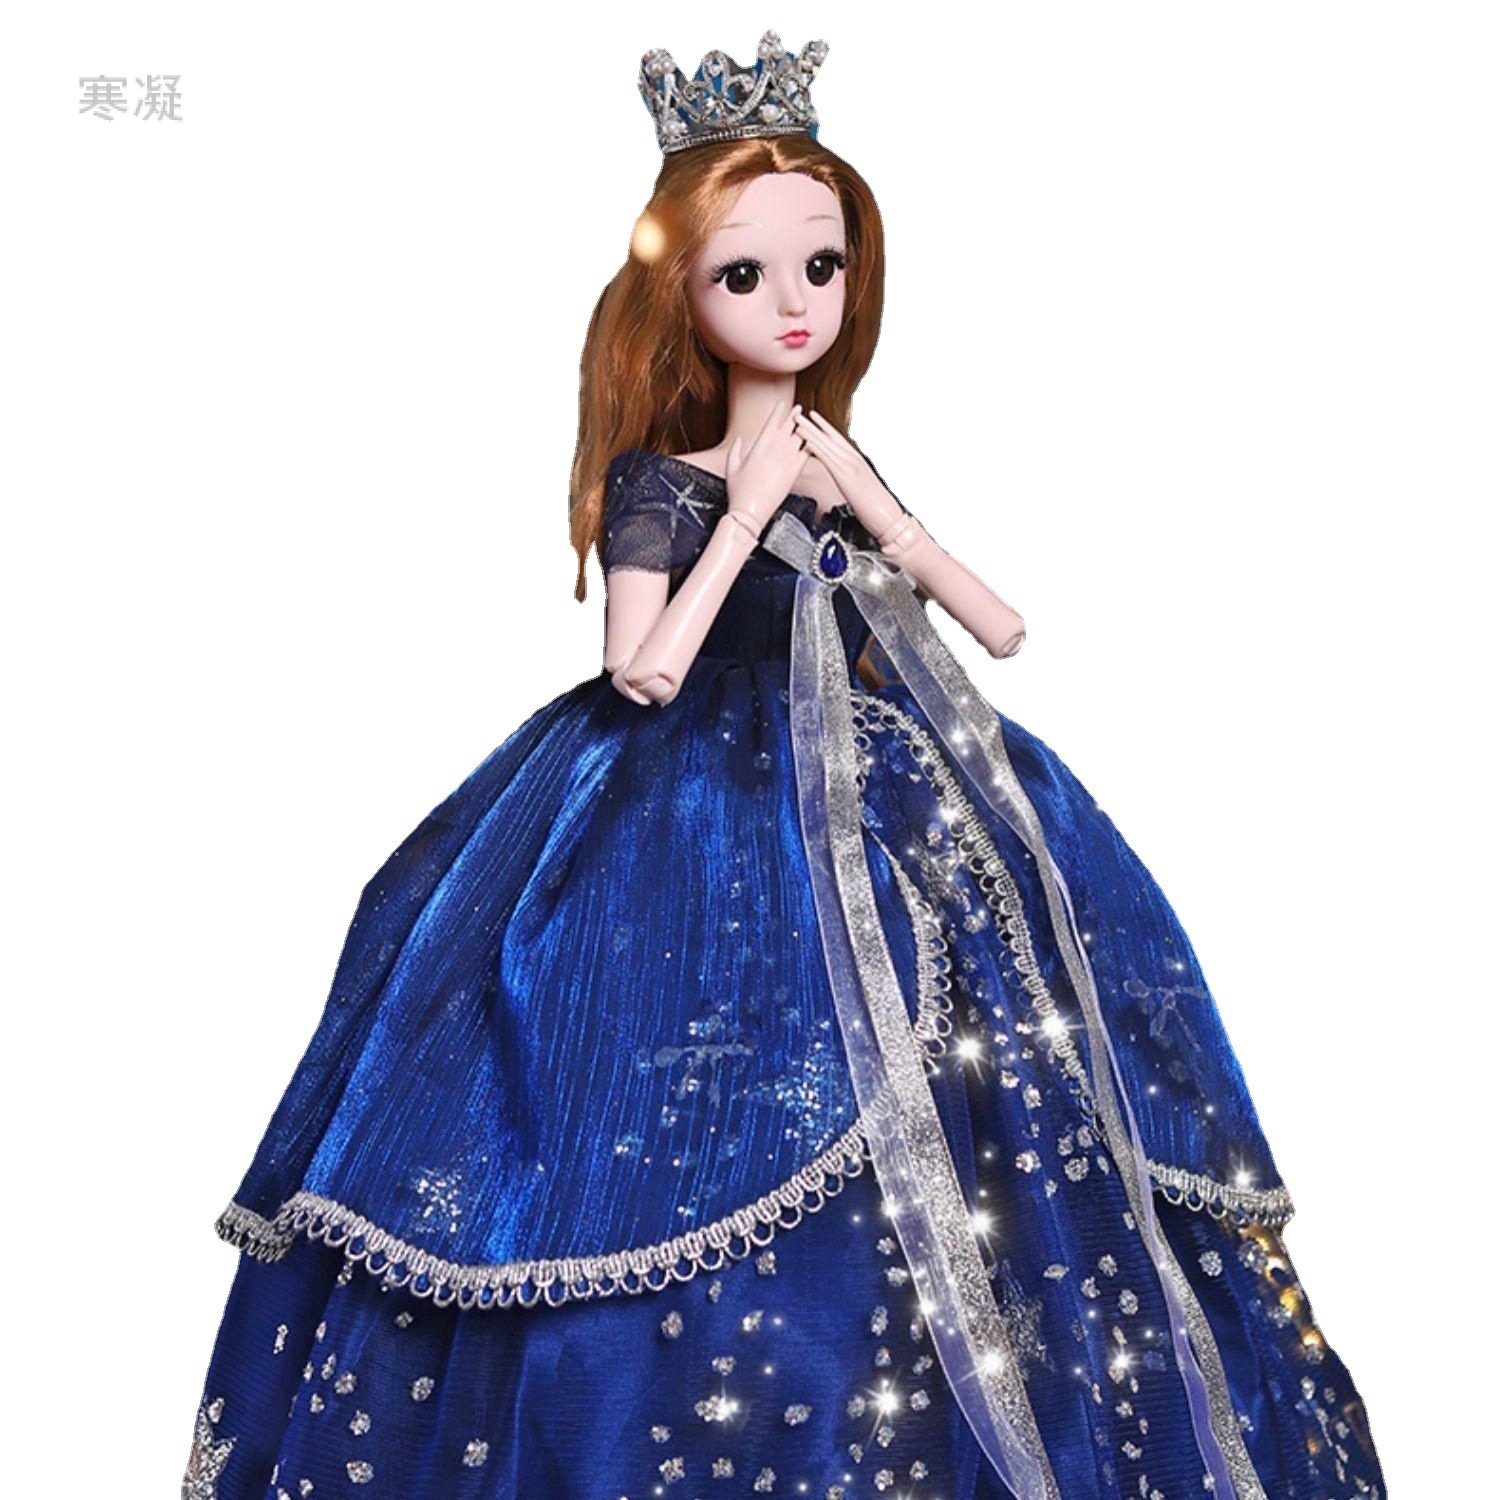 Large Size 60cm Light Barbie Doll Set Collection Edition Artificial Oversized Princess Girls' Toy Gift Cloth